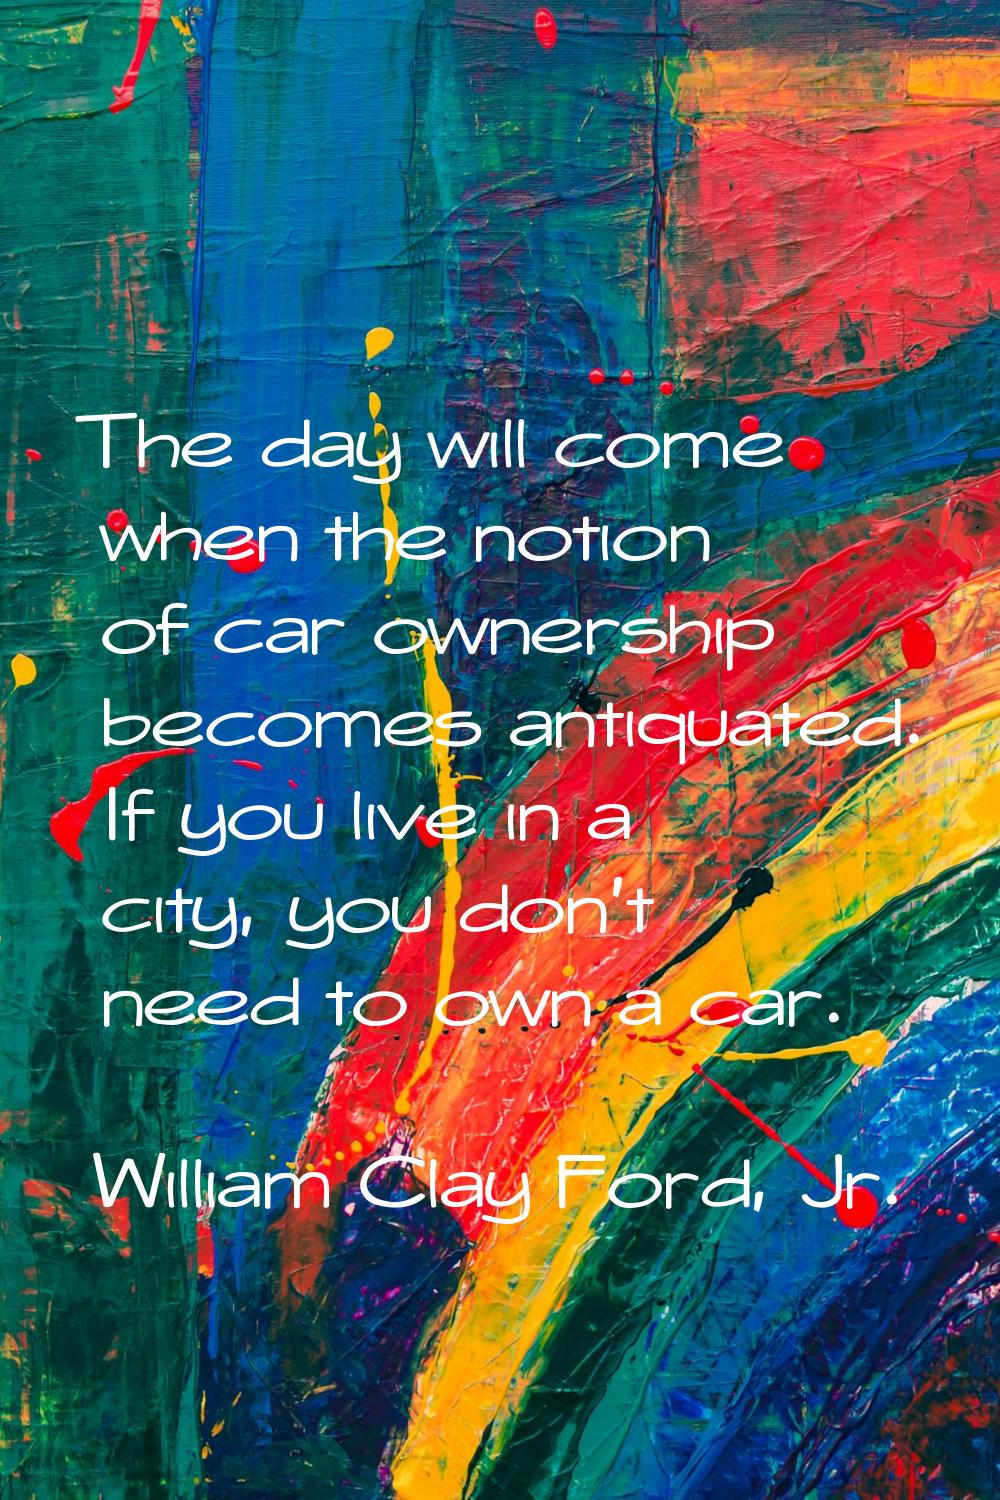 The day will come when the notion of car ownership becomes antiquated. If you live in a city, you d